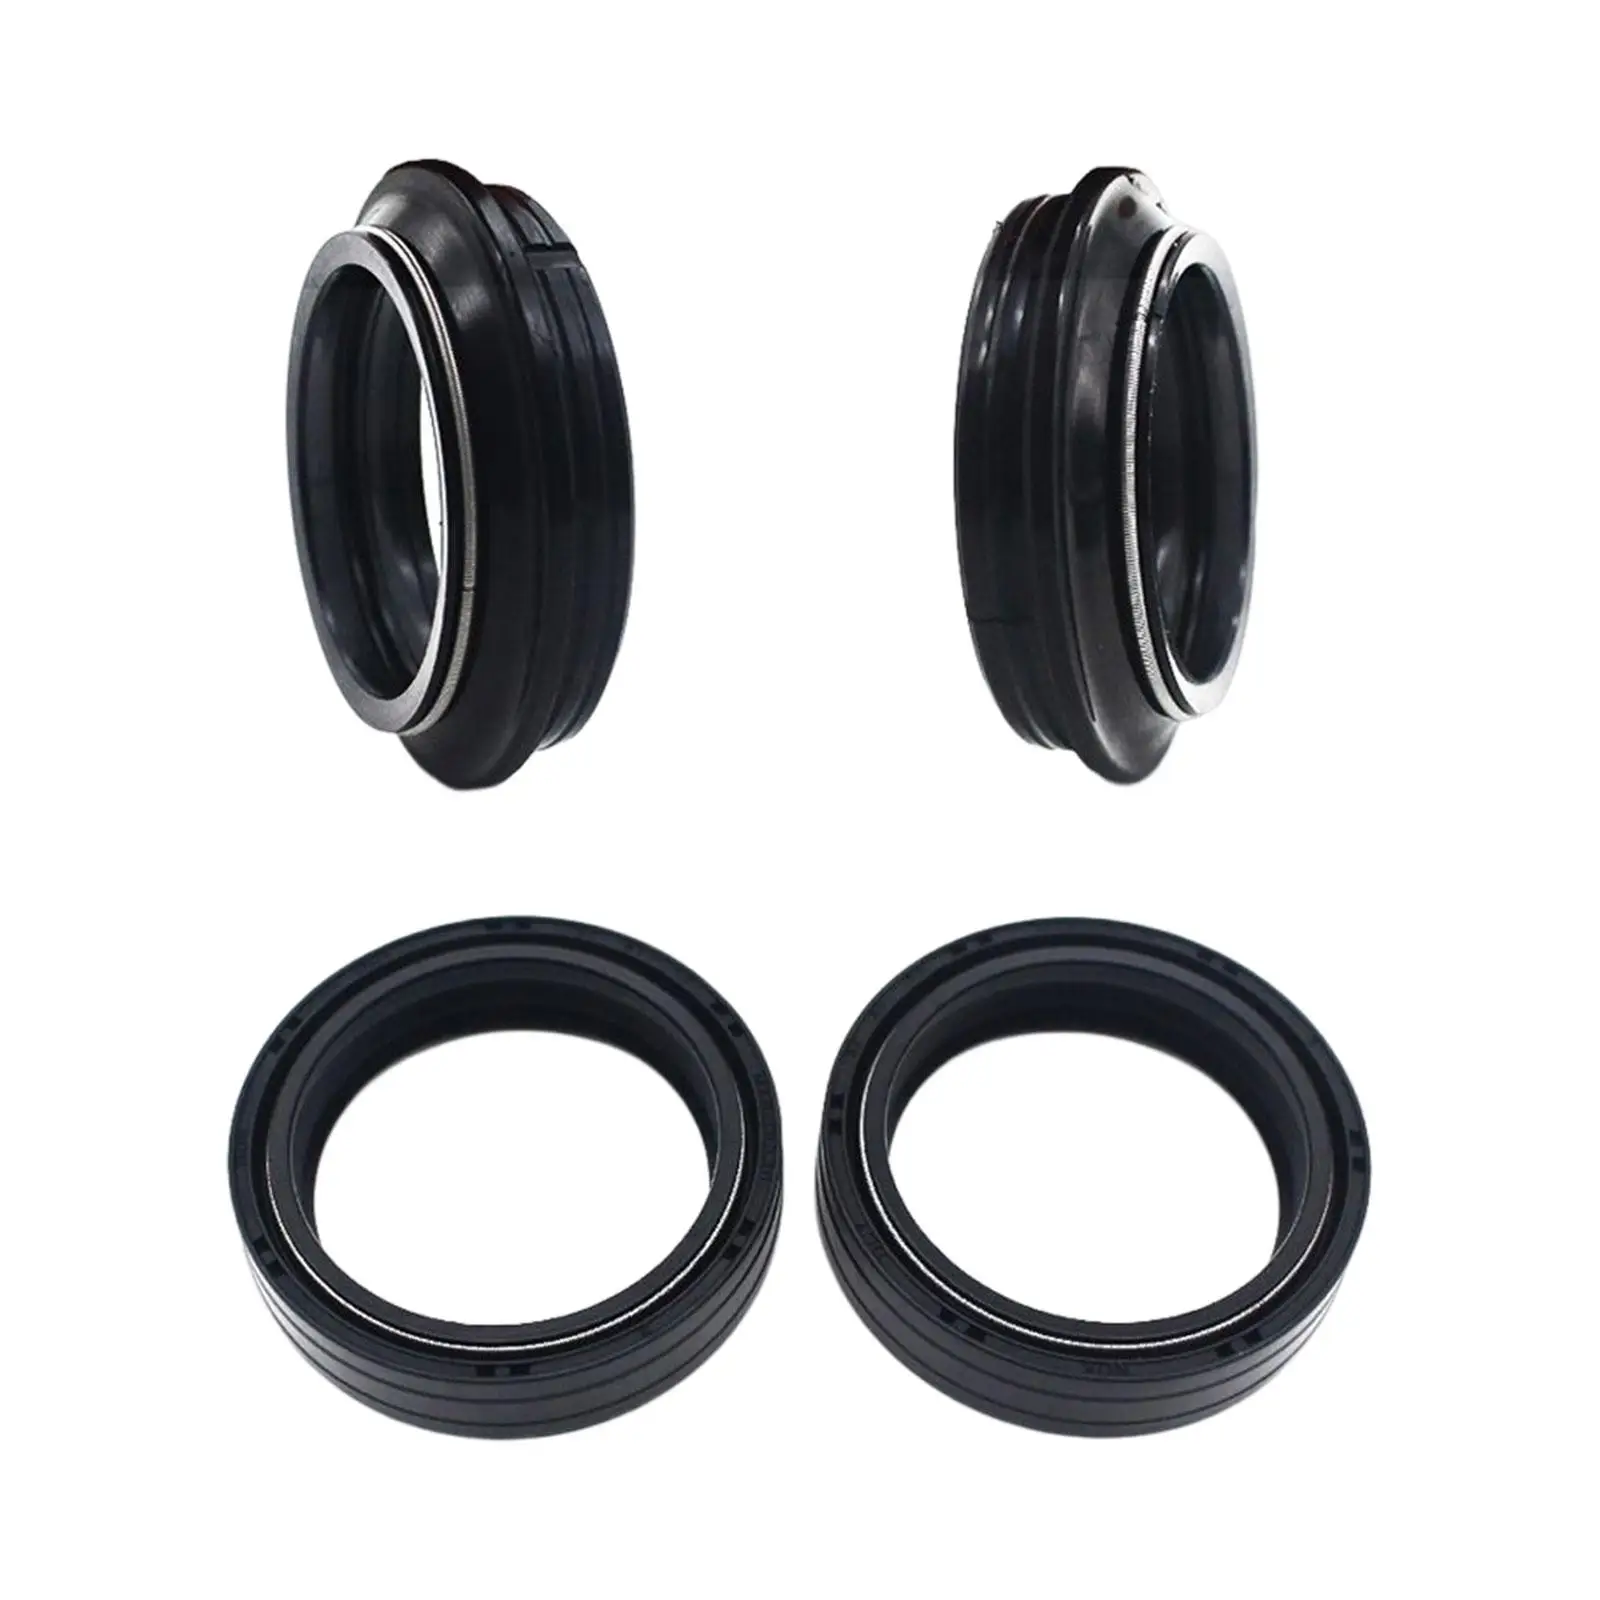 Fork Seal and Dust Seal Kit Accessories for BMW R1200GS Replace Durable